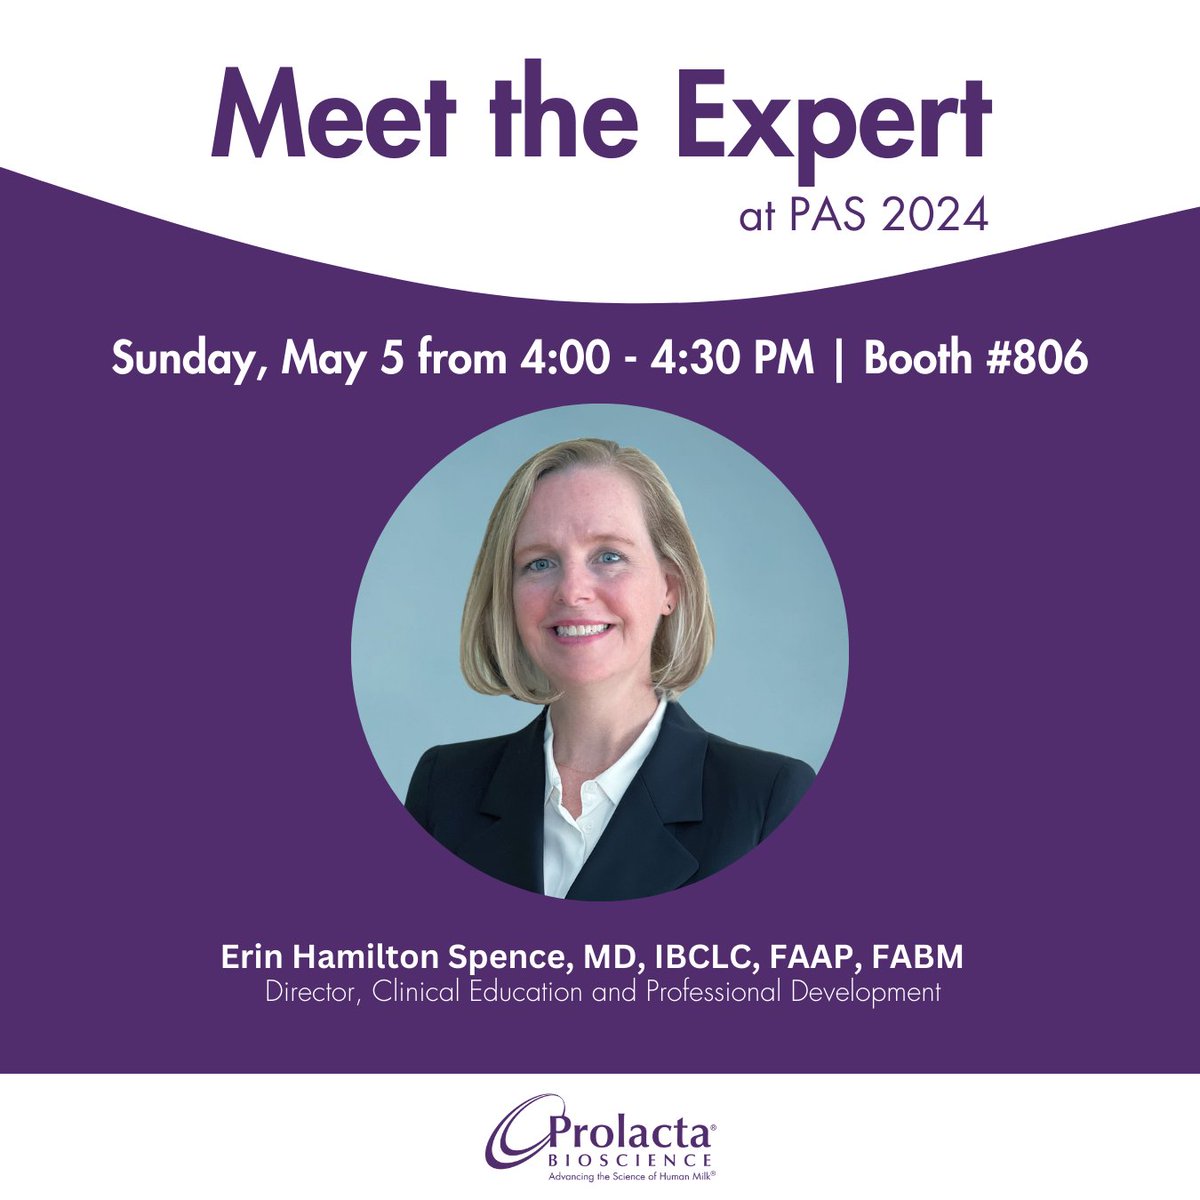 Don't forget our 'Meet the Experts' session at booth 806 tomorrow from 4-5 pm with Dr Erin Hamilton Spence. Let's make this conference an enriching experience together!